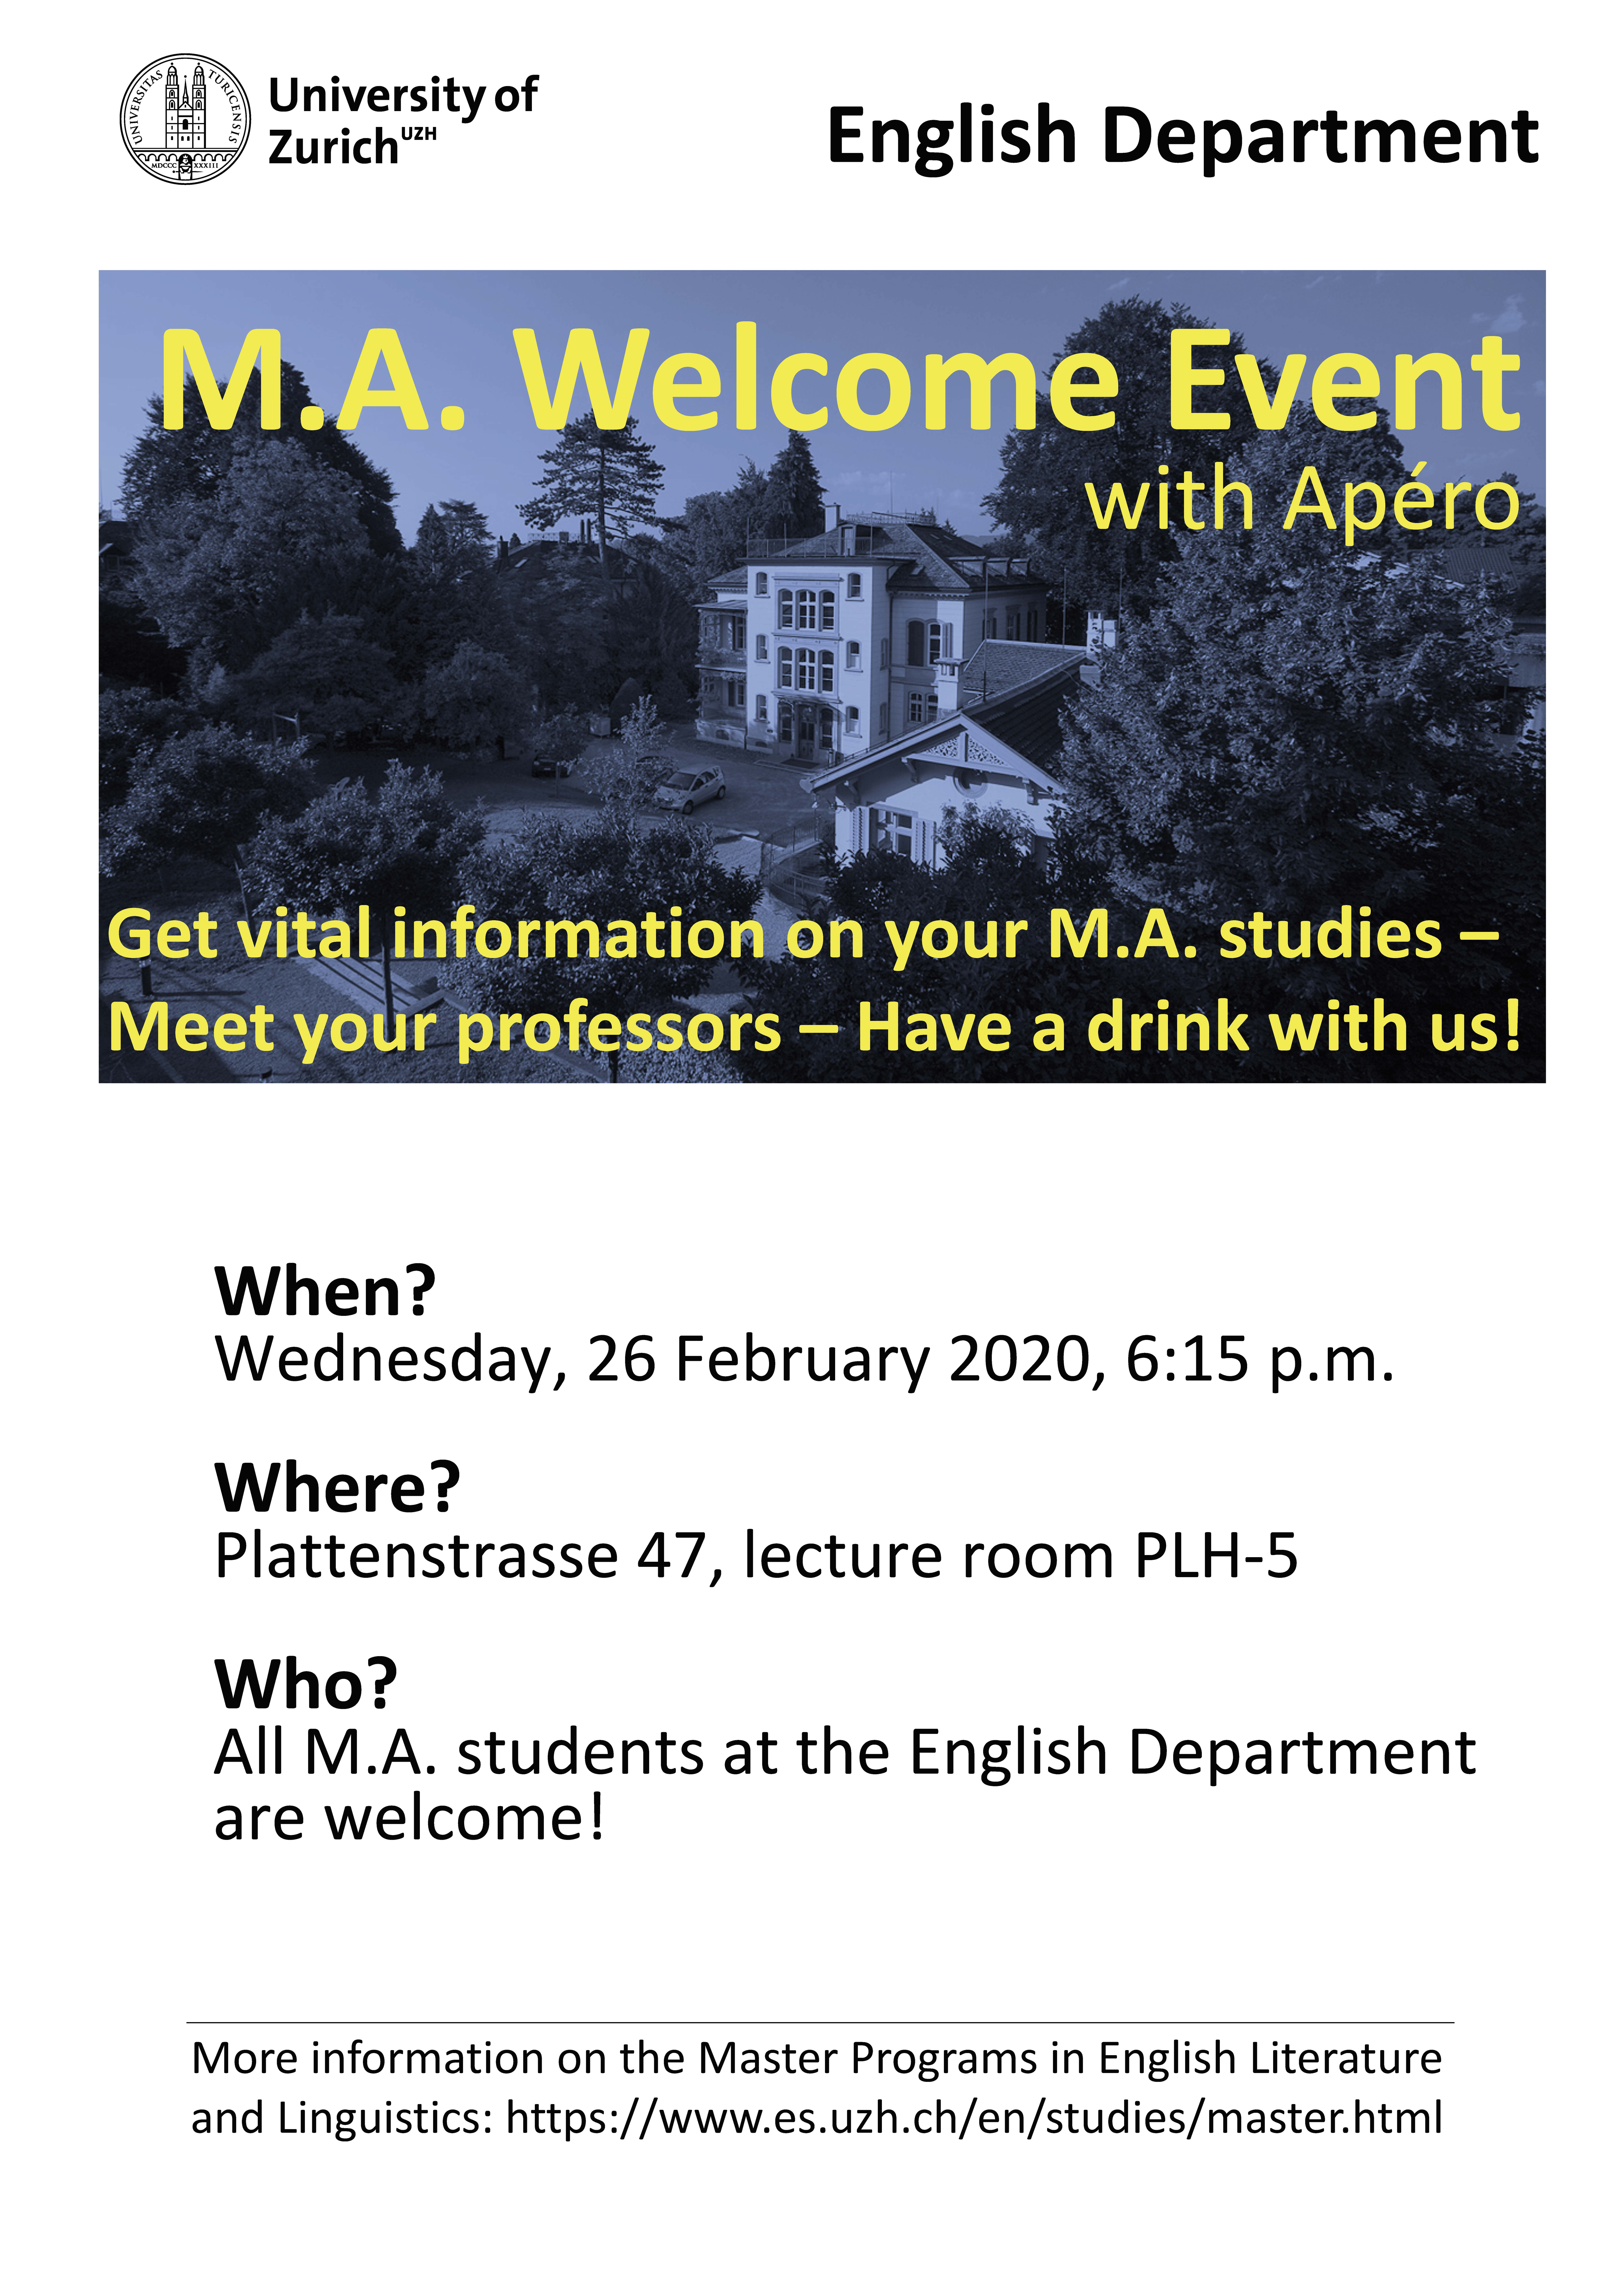 M.A. Welcome Event